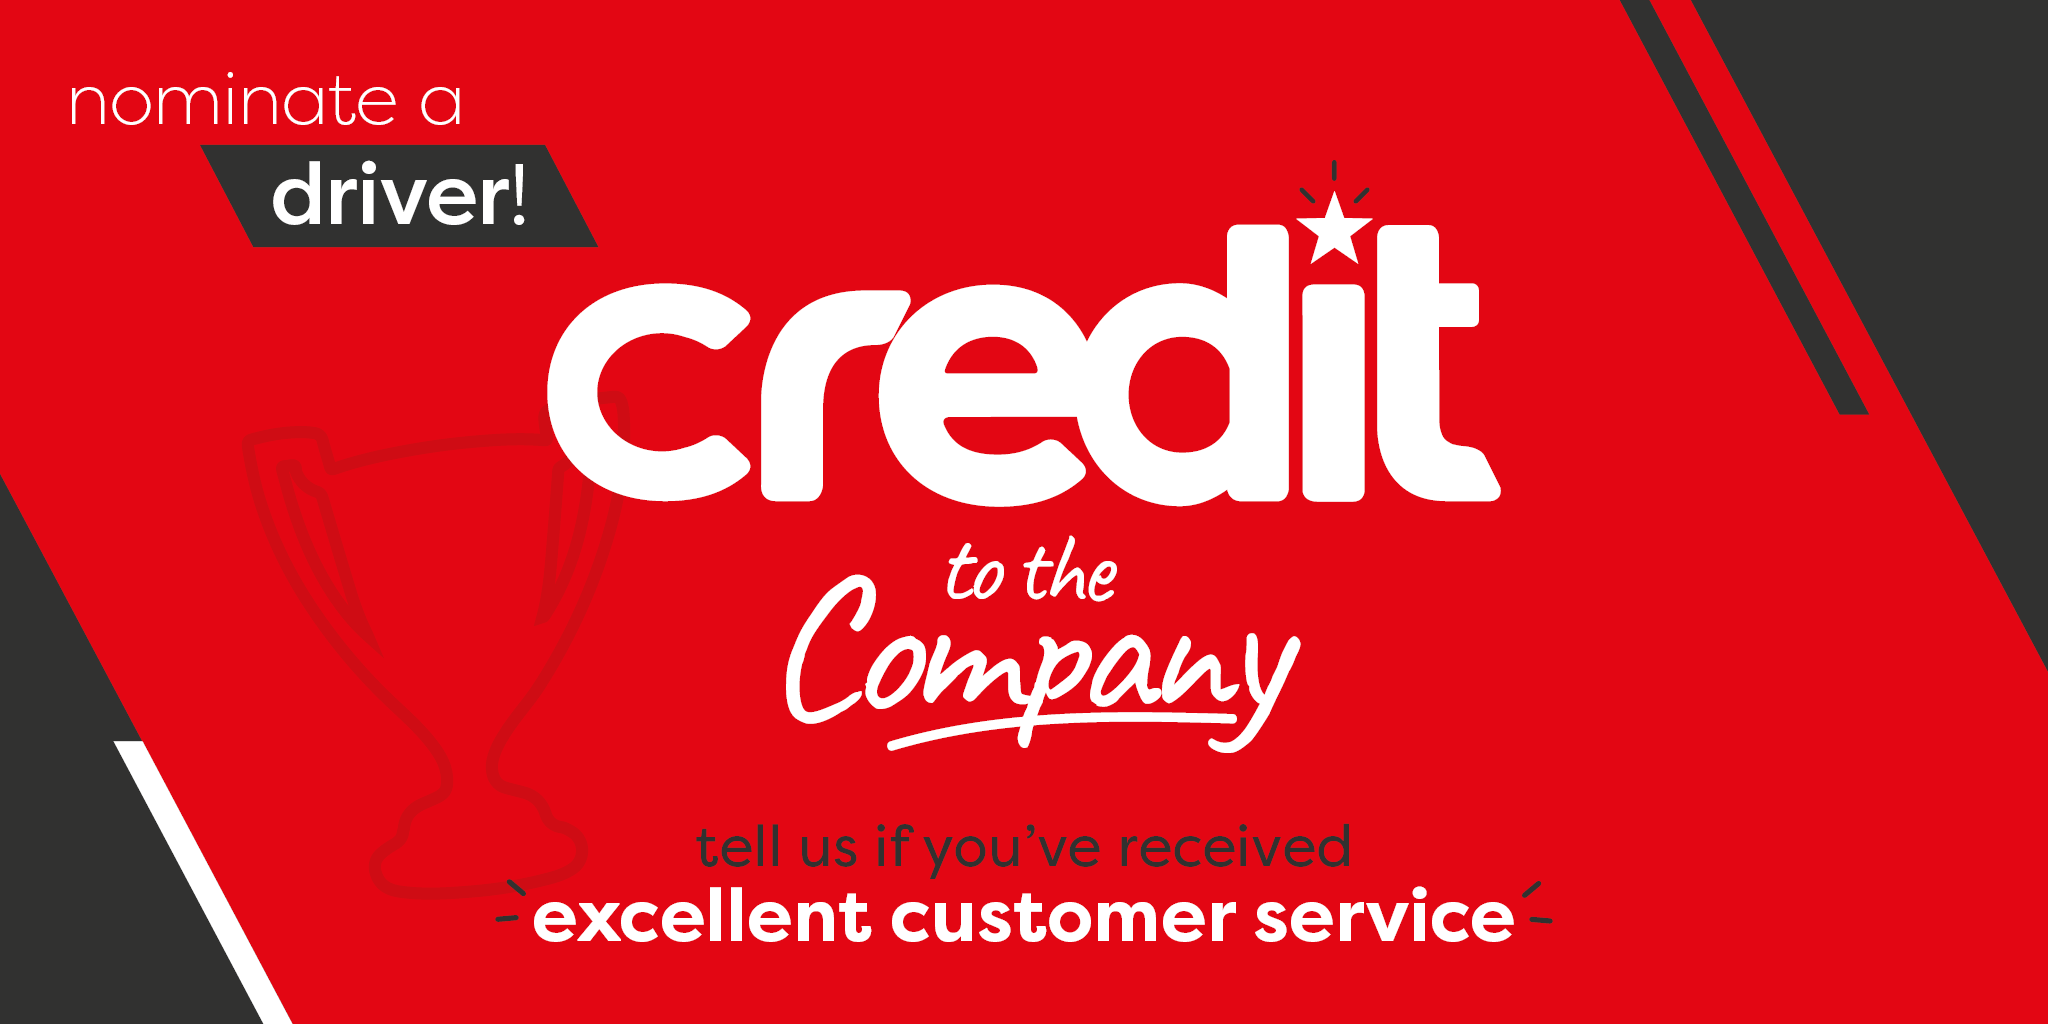 nominate a driver - credit to the company